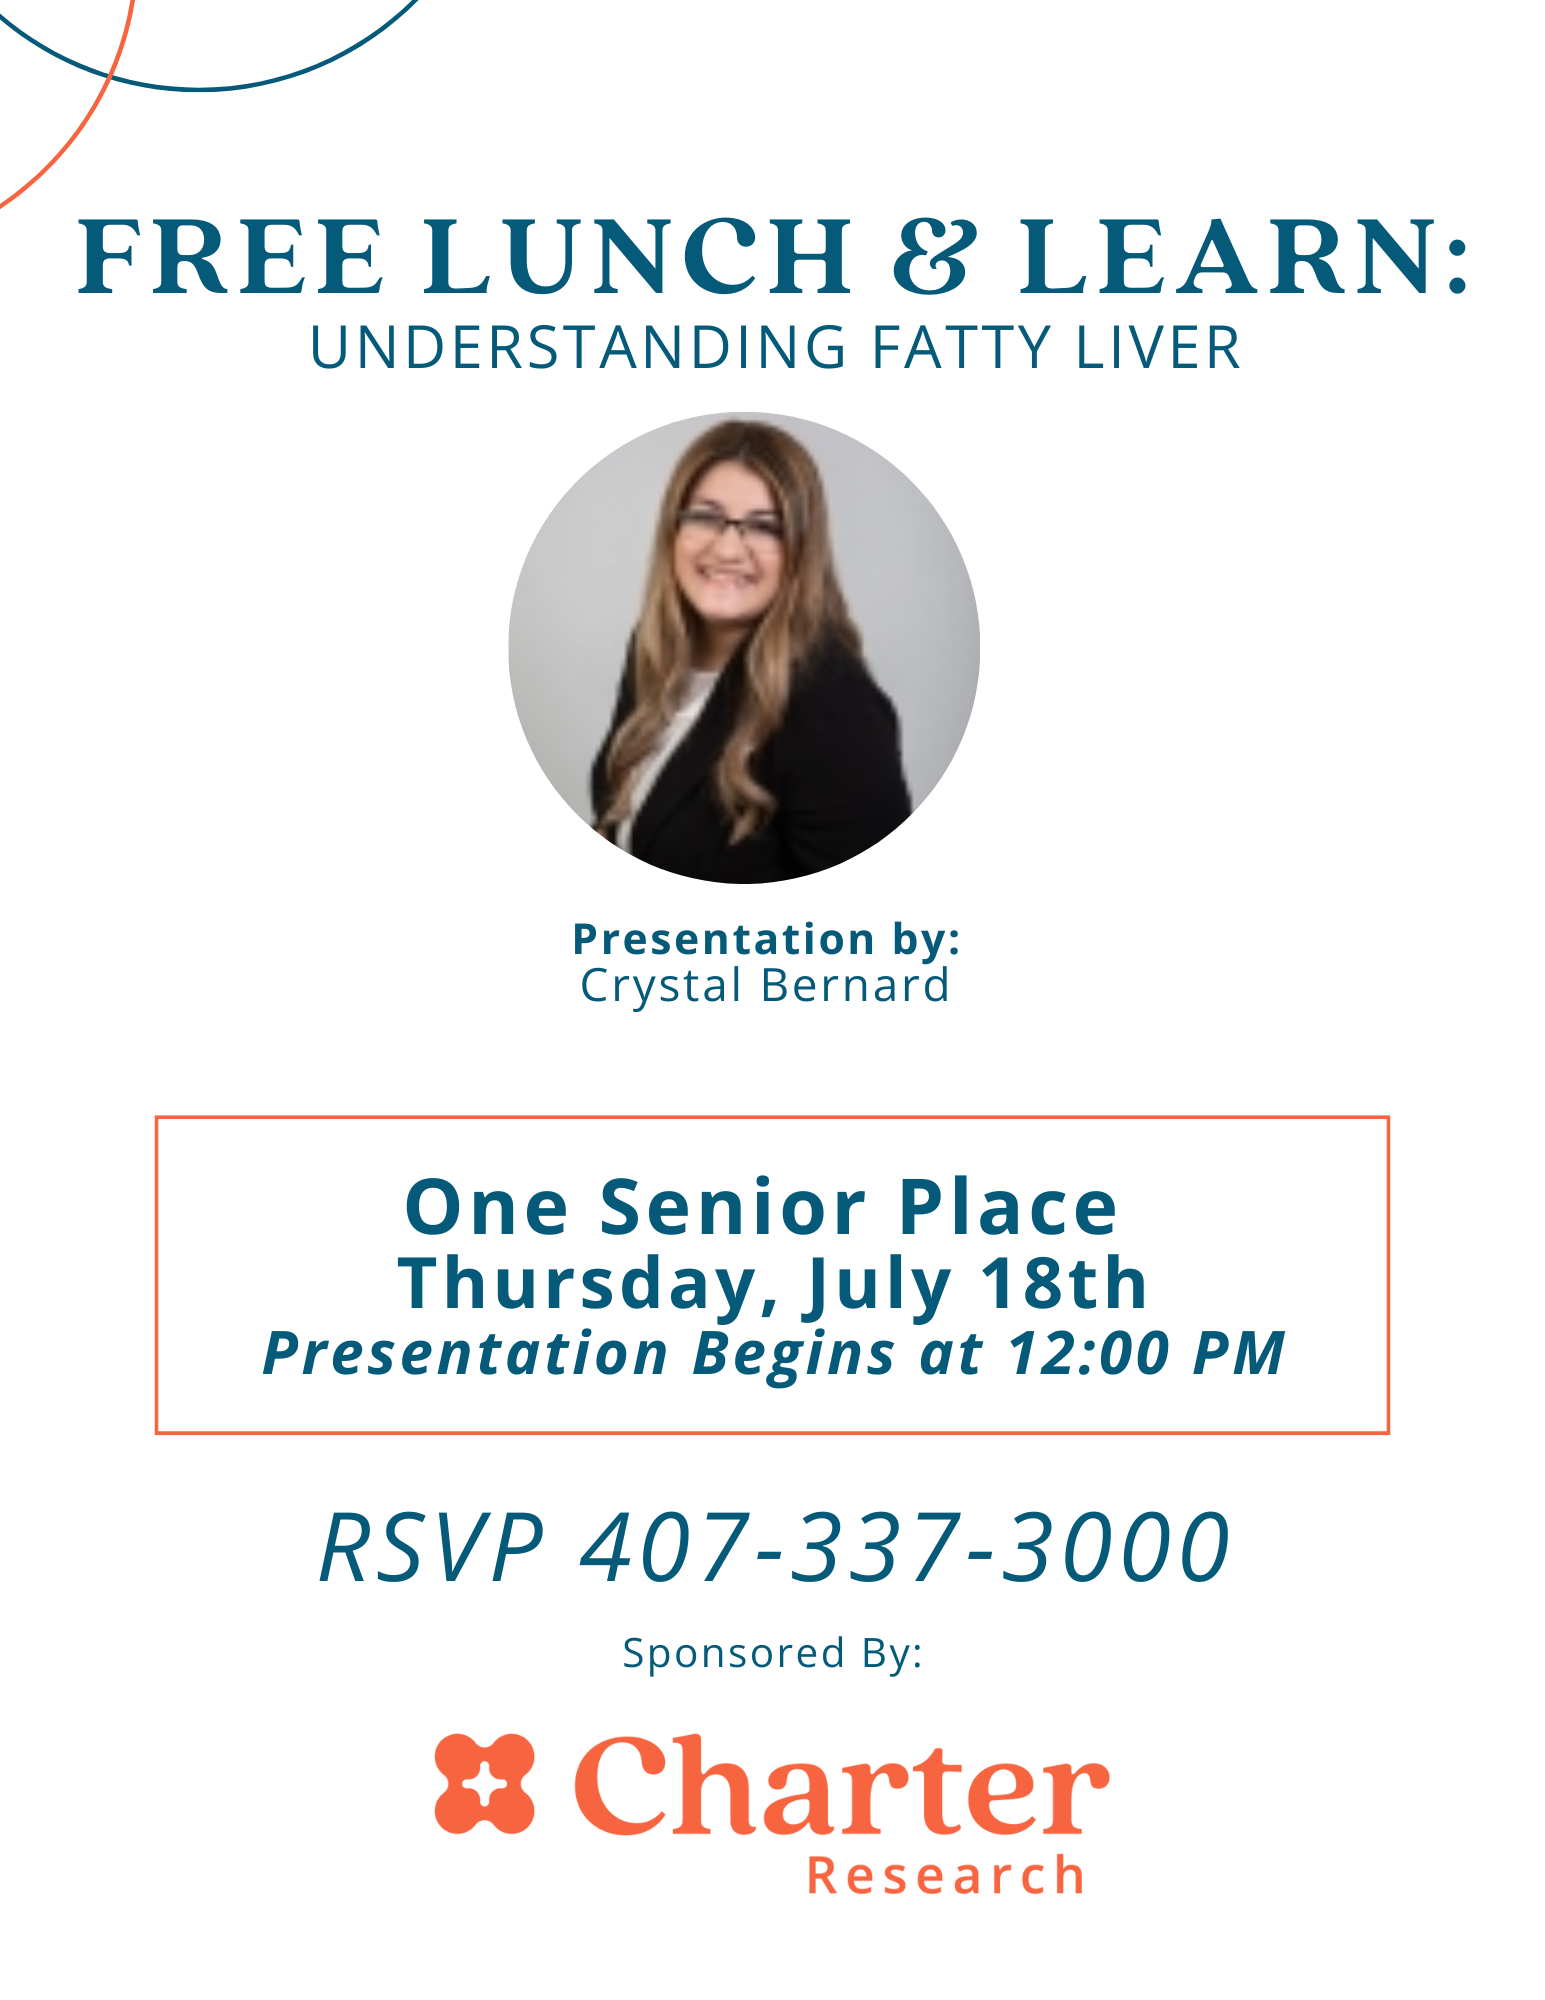 FREE Lunch & Learn: Understanding Fatty Liver